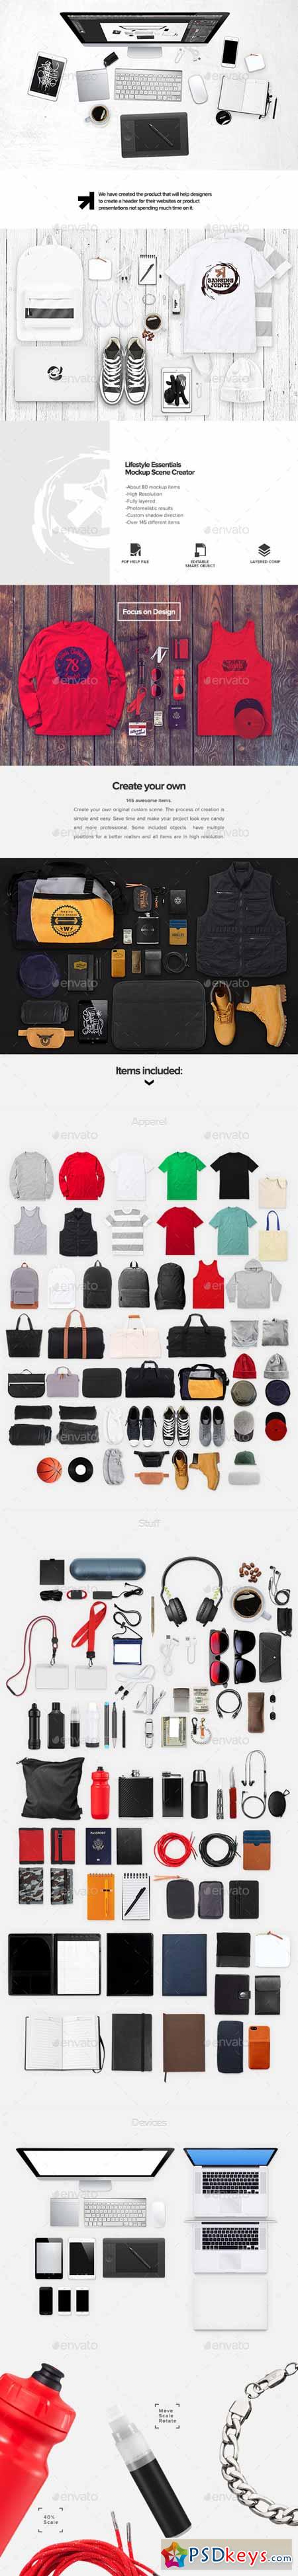 Download Apparel Lifestyle Essentials Mockup Creator 12125715 » Free Download Photoshop Vector Stock ...